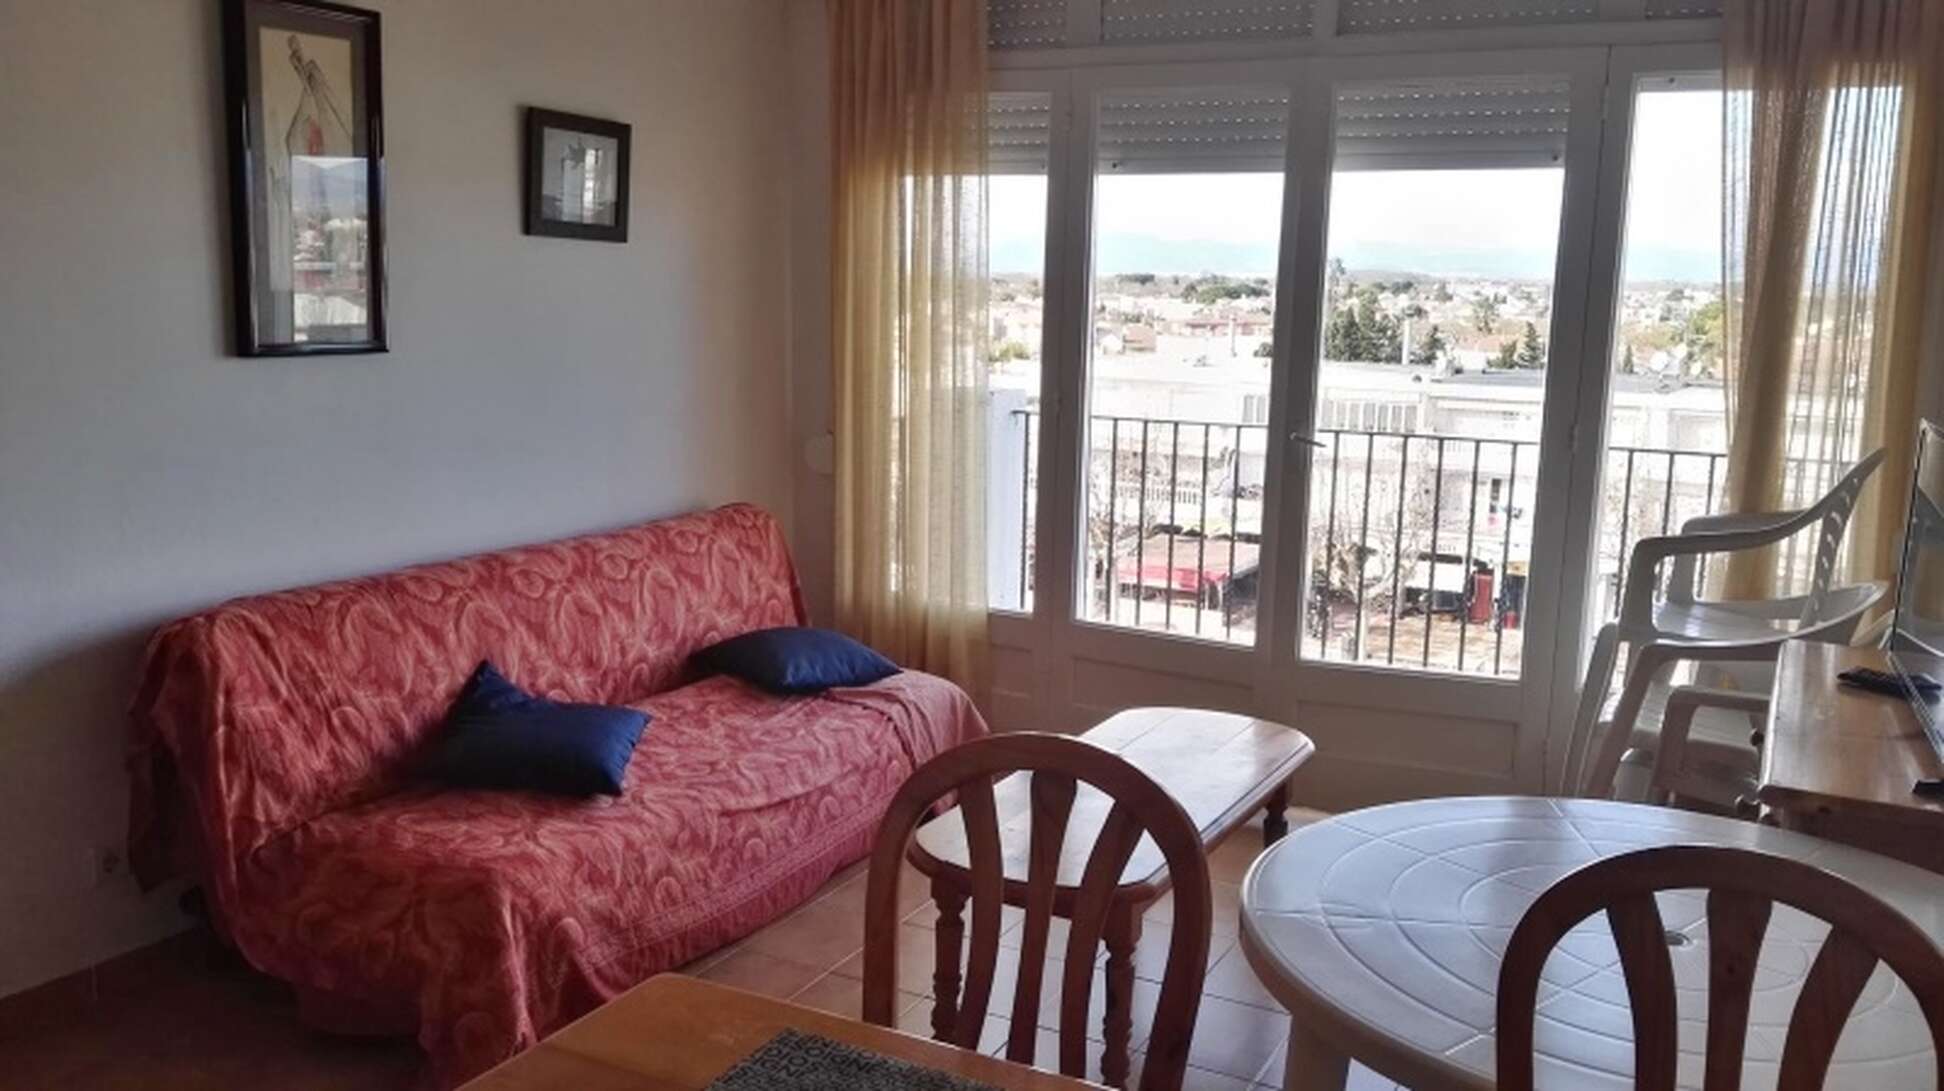 Flat for sale in the centre of Empuriabrava